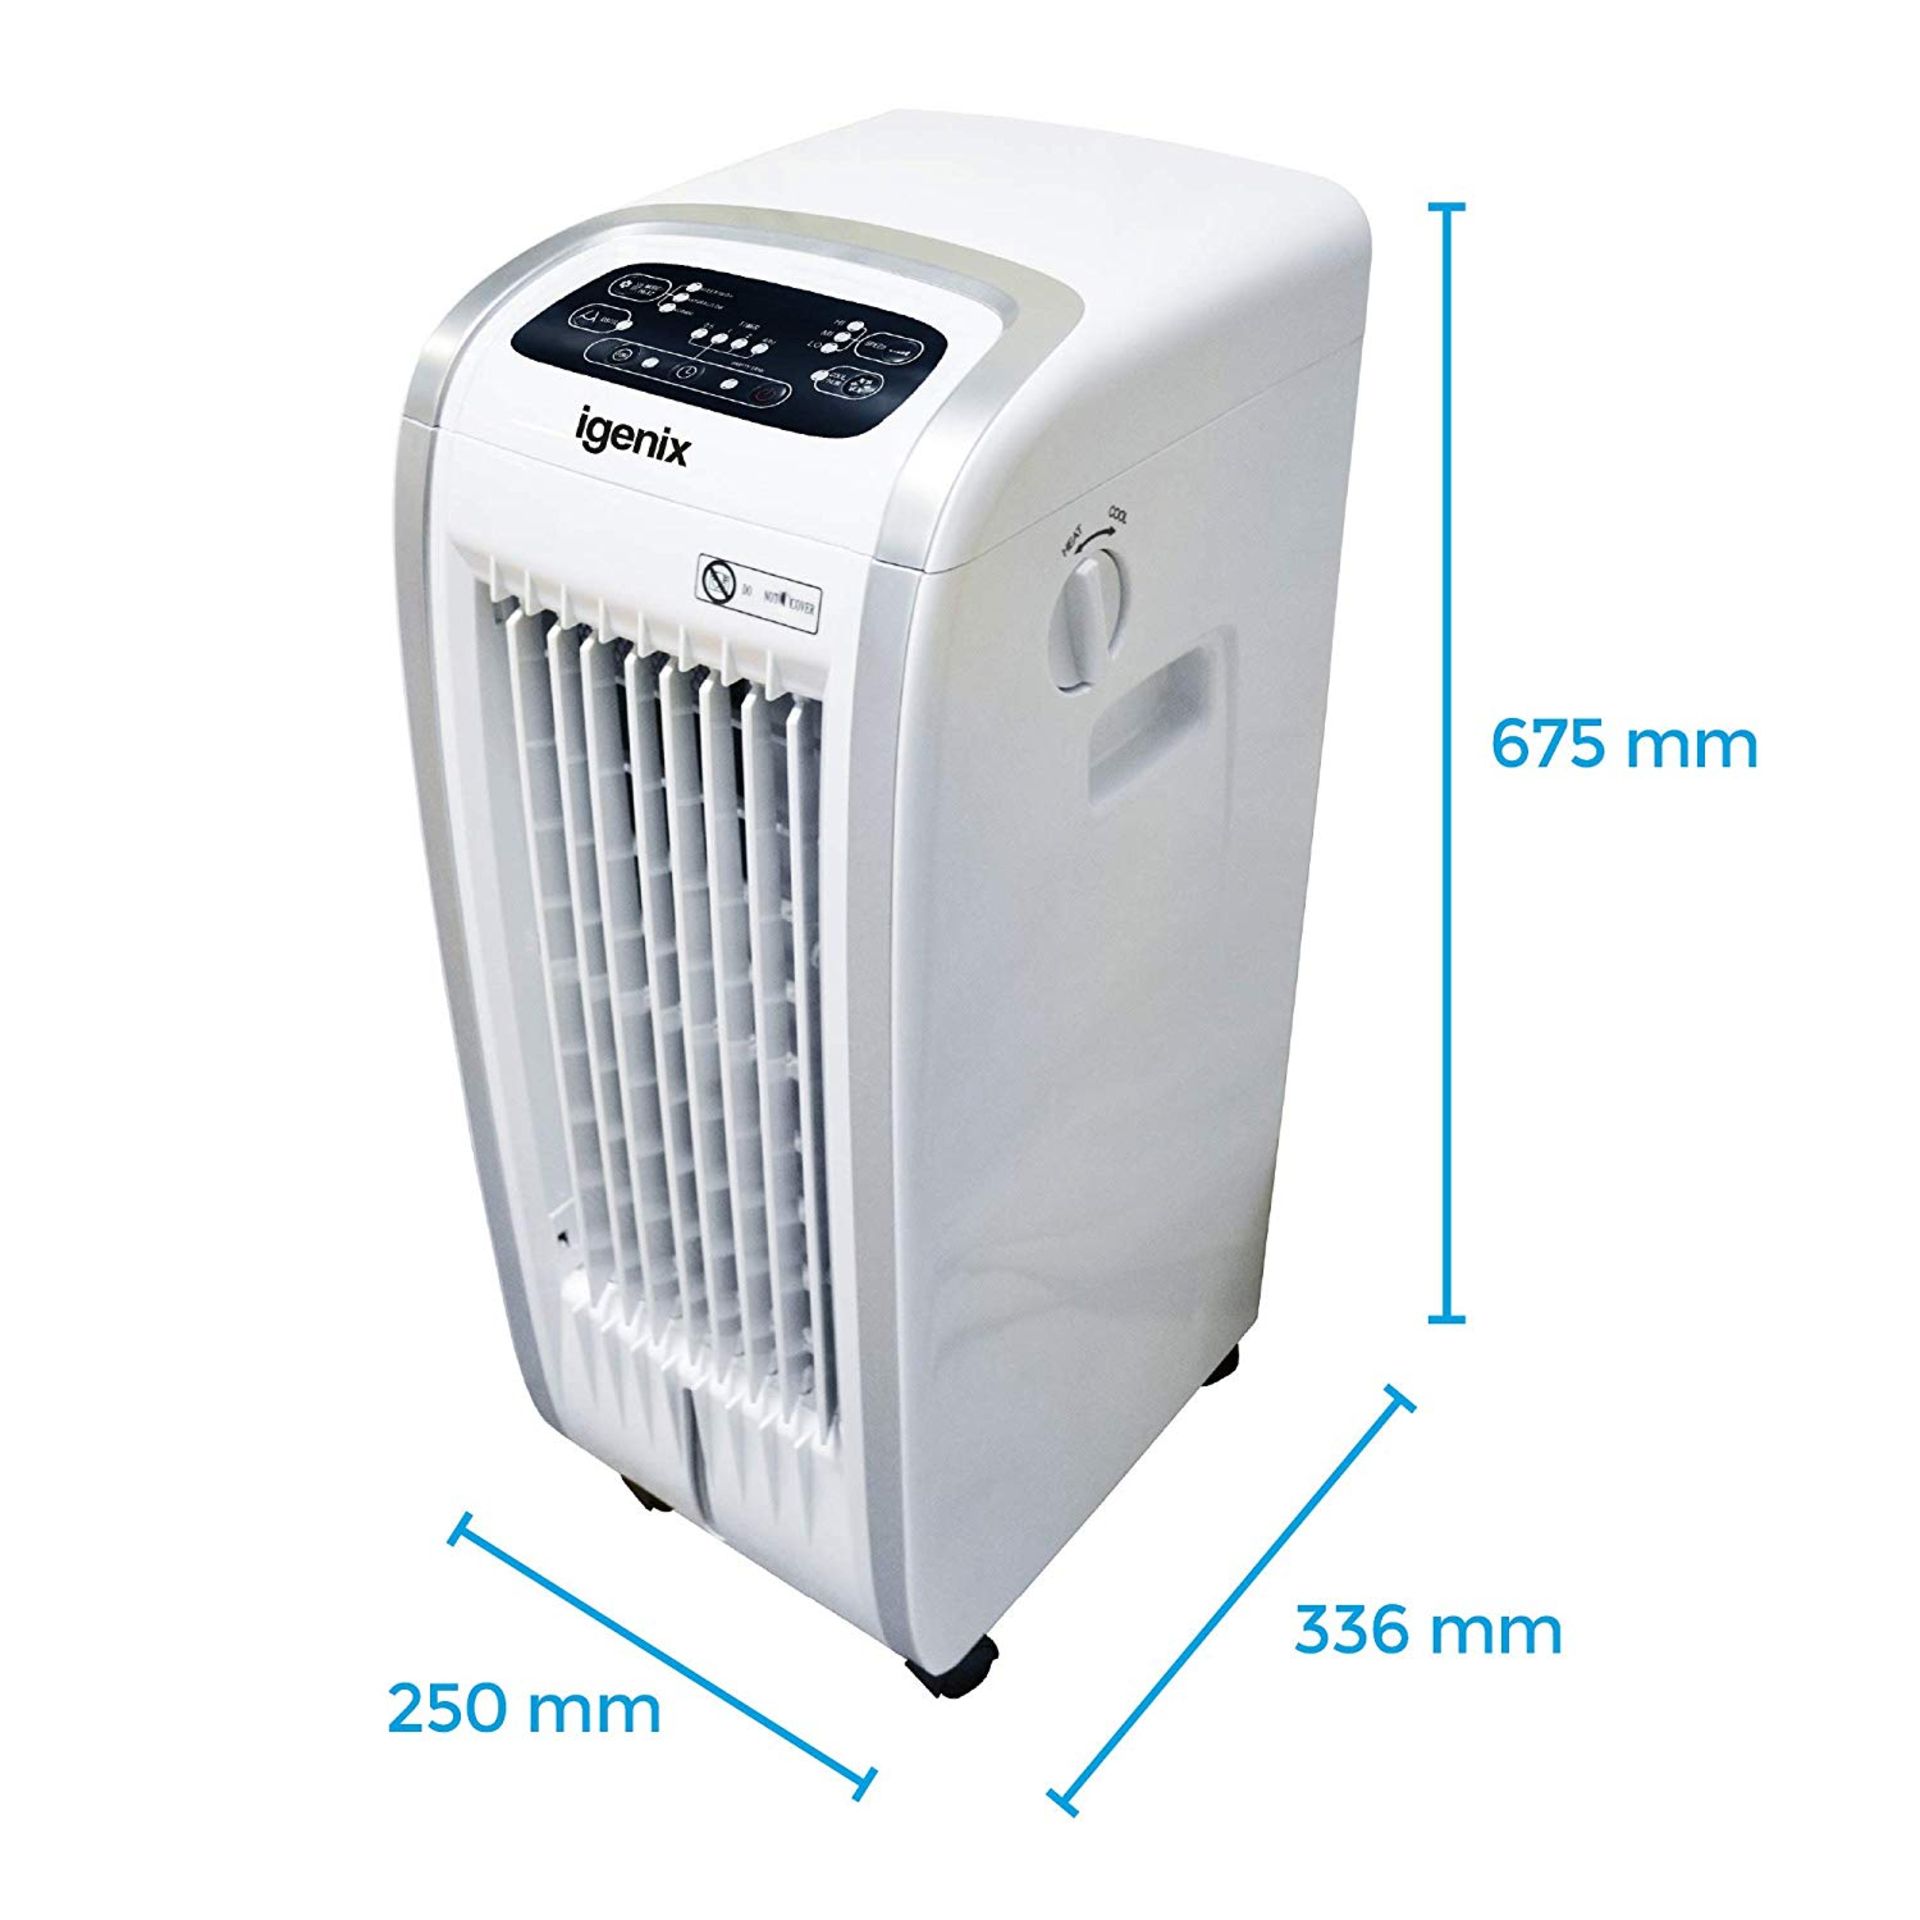 1 x Igenix IG9704 Portable 4-in-1 Evaporative Air Cooler with Fan Heater, Humidifier and Air